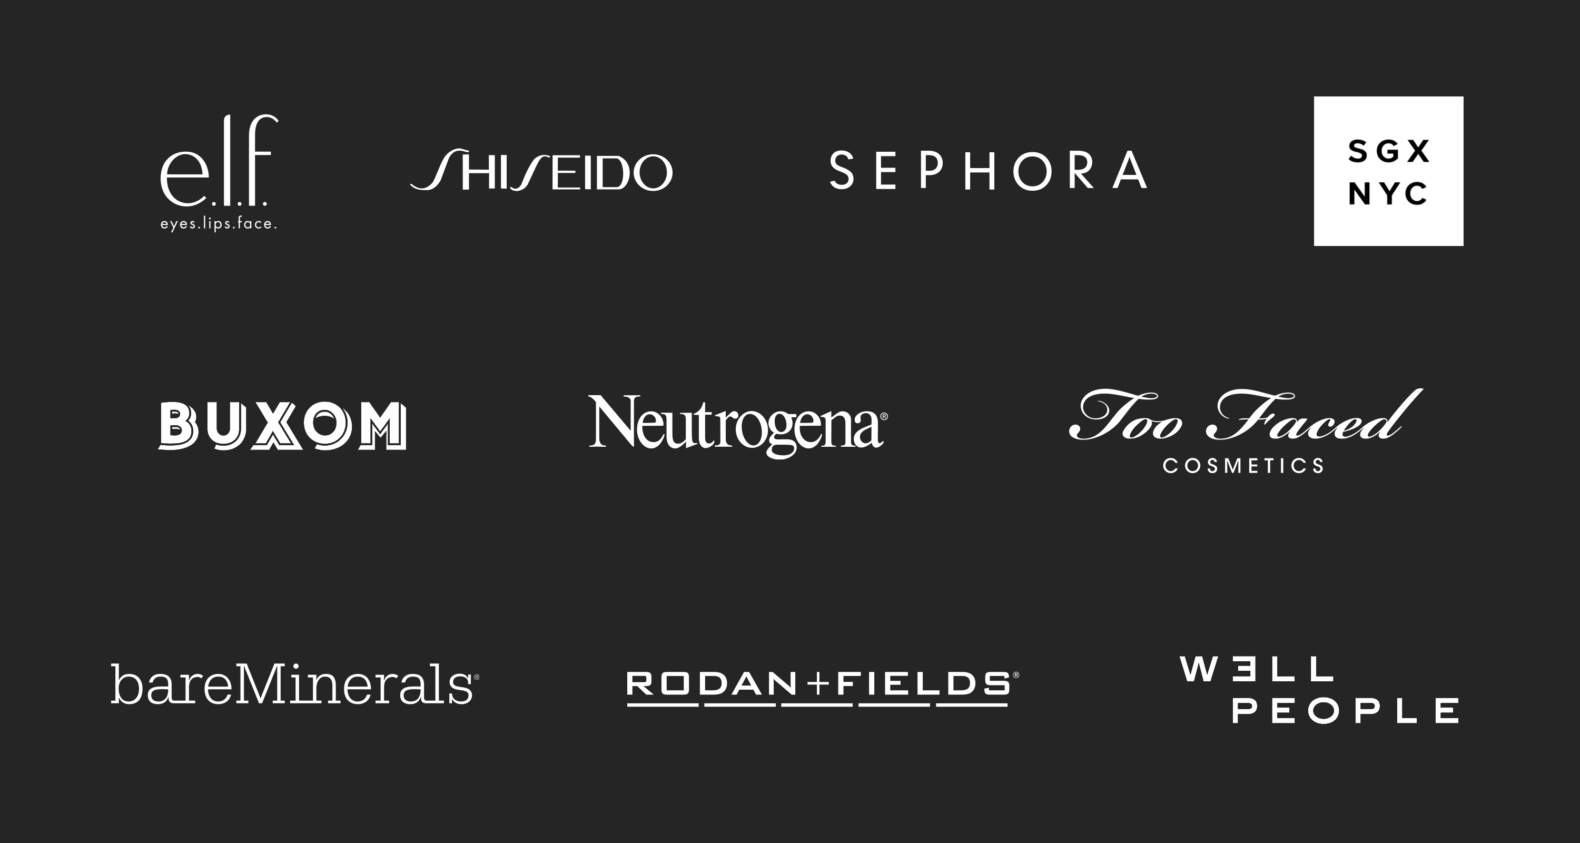 We've worked with e.l.f. Shisiedo, sephora, SGX NYC, buxom, neutrogena, too faced cosmetics, bare minderals, rodan and fields, and well people.